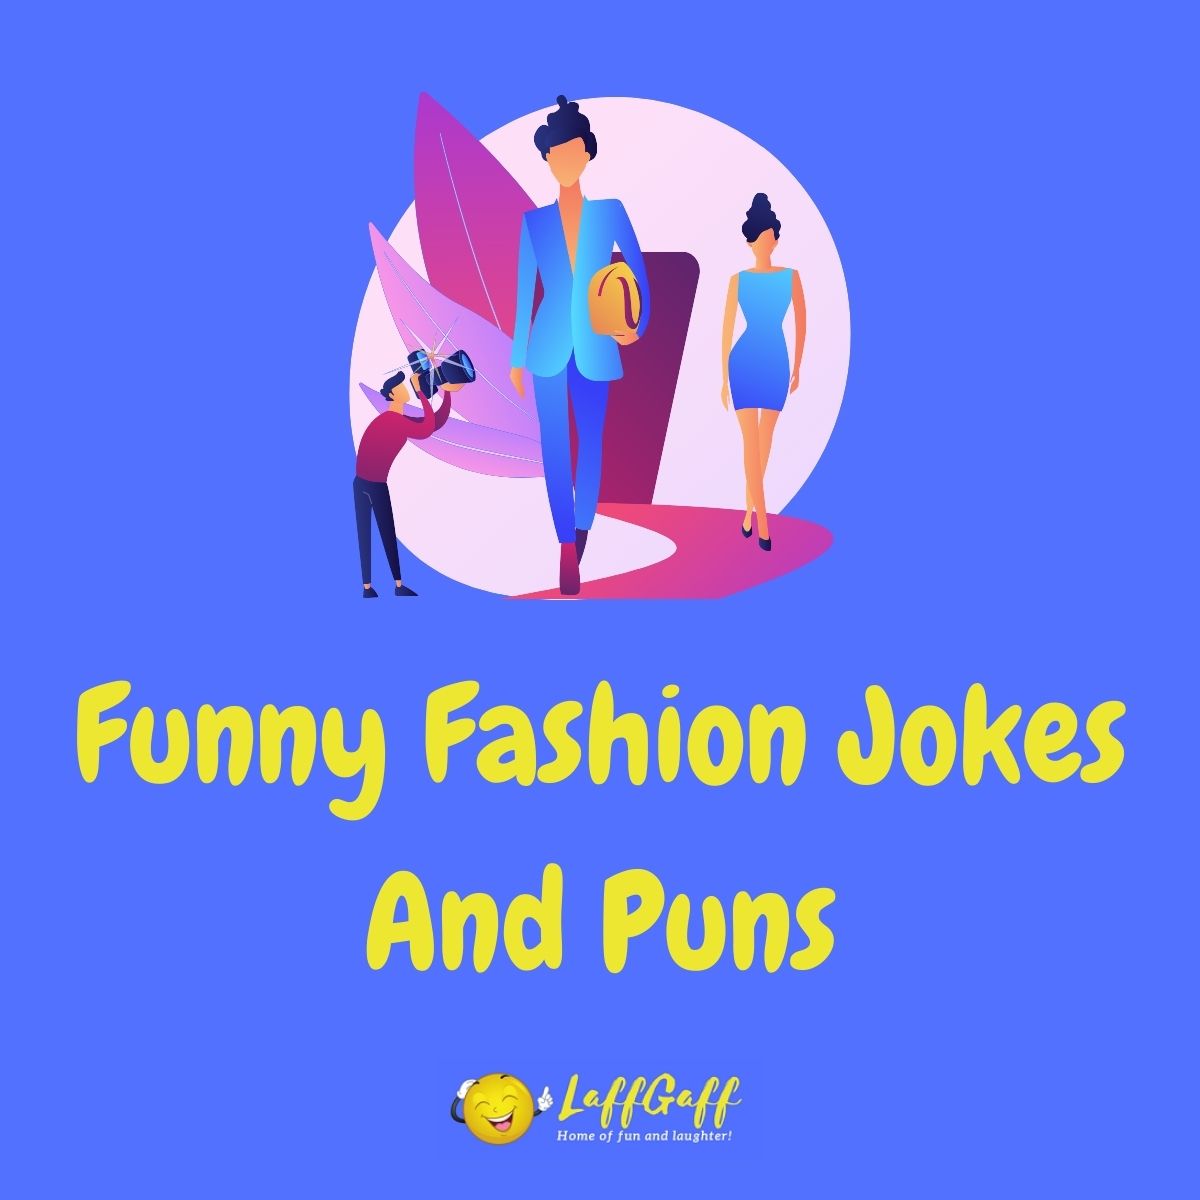 Featured image for a page of funny fashion jokes and puns.